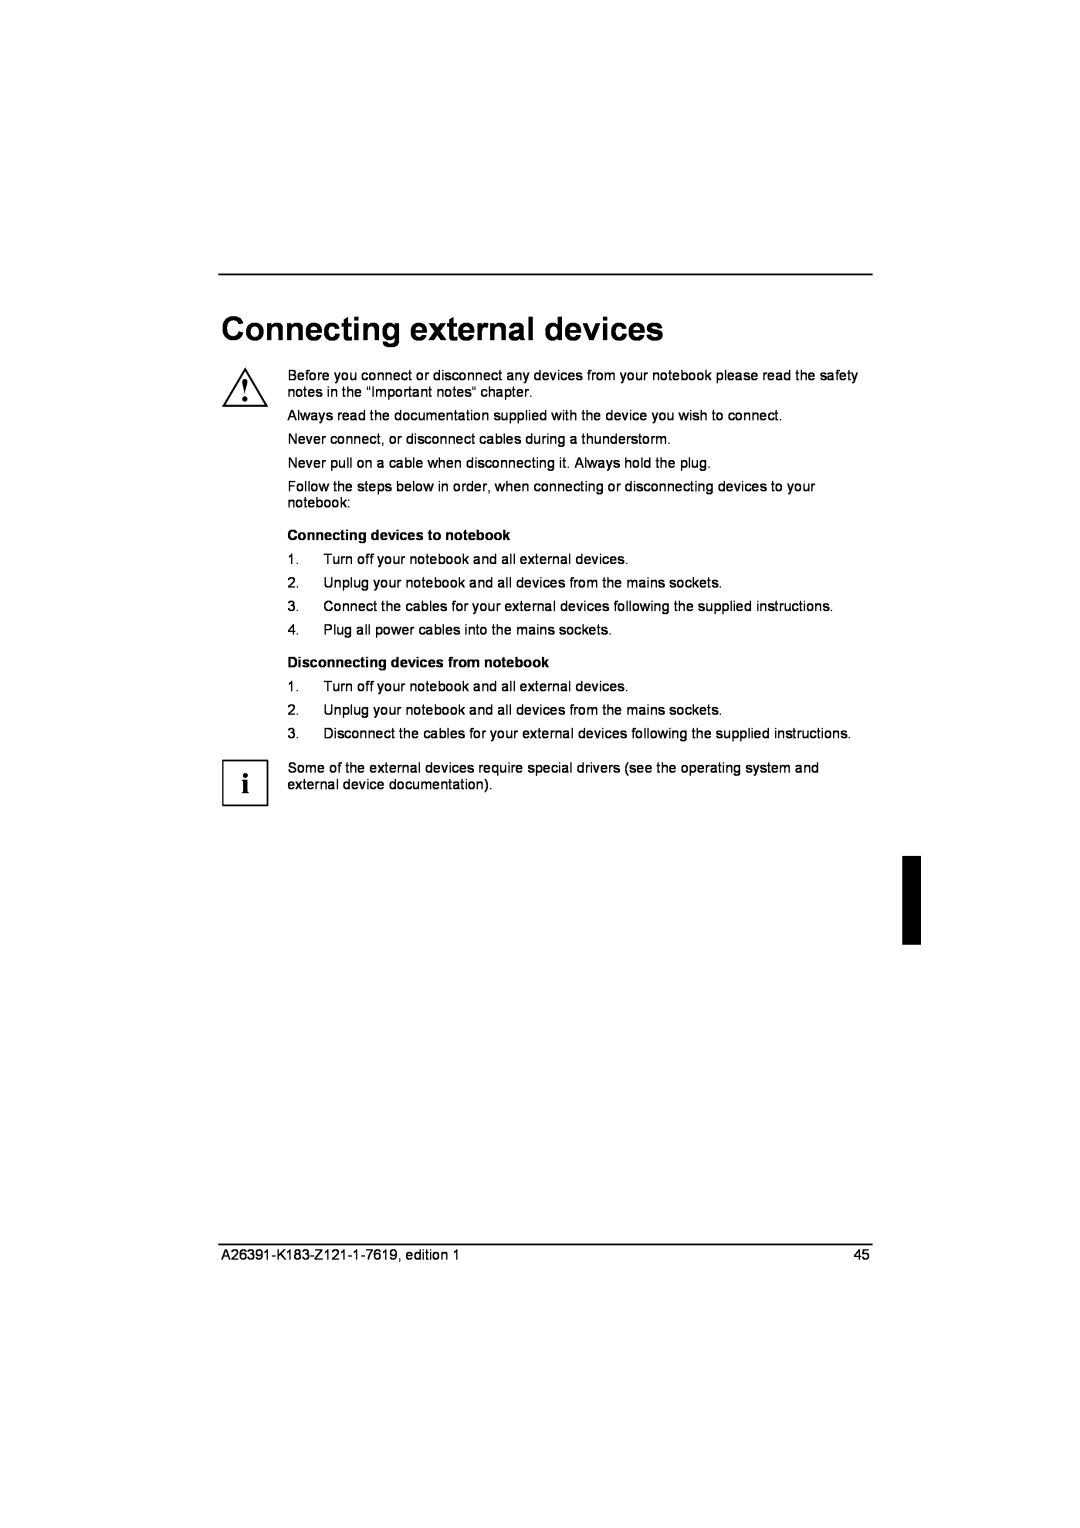 Fujitsu Siemens Computers V2035 manual Connecting external devices, Connecting devices to notebook 